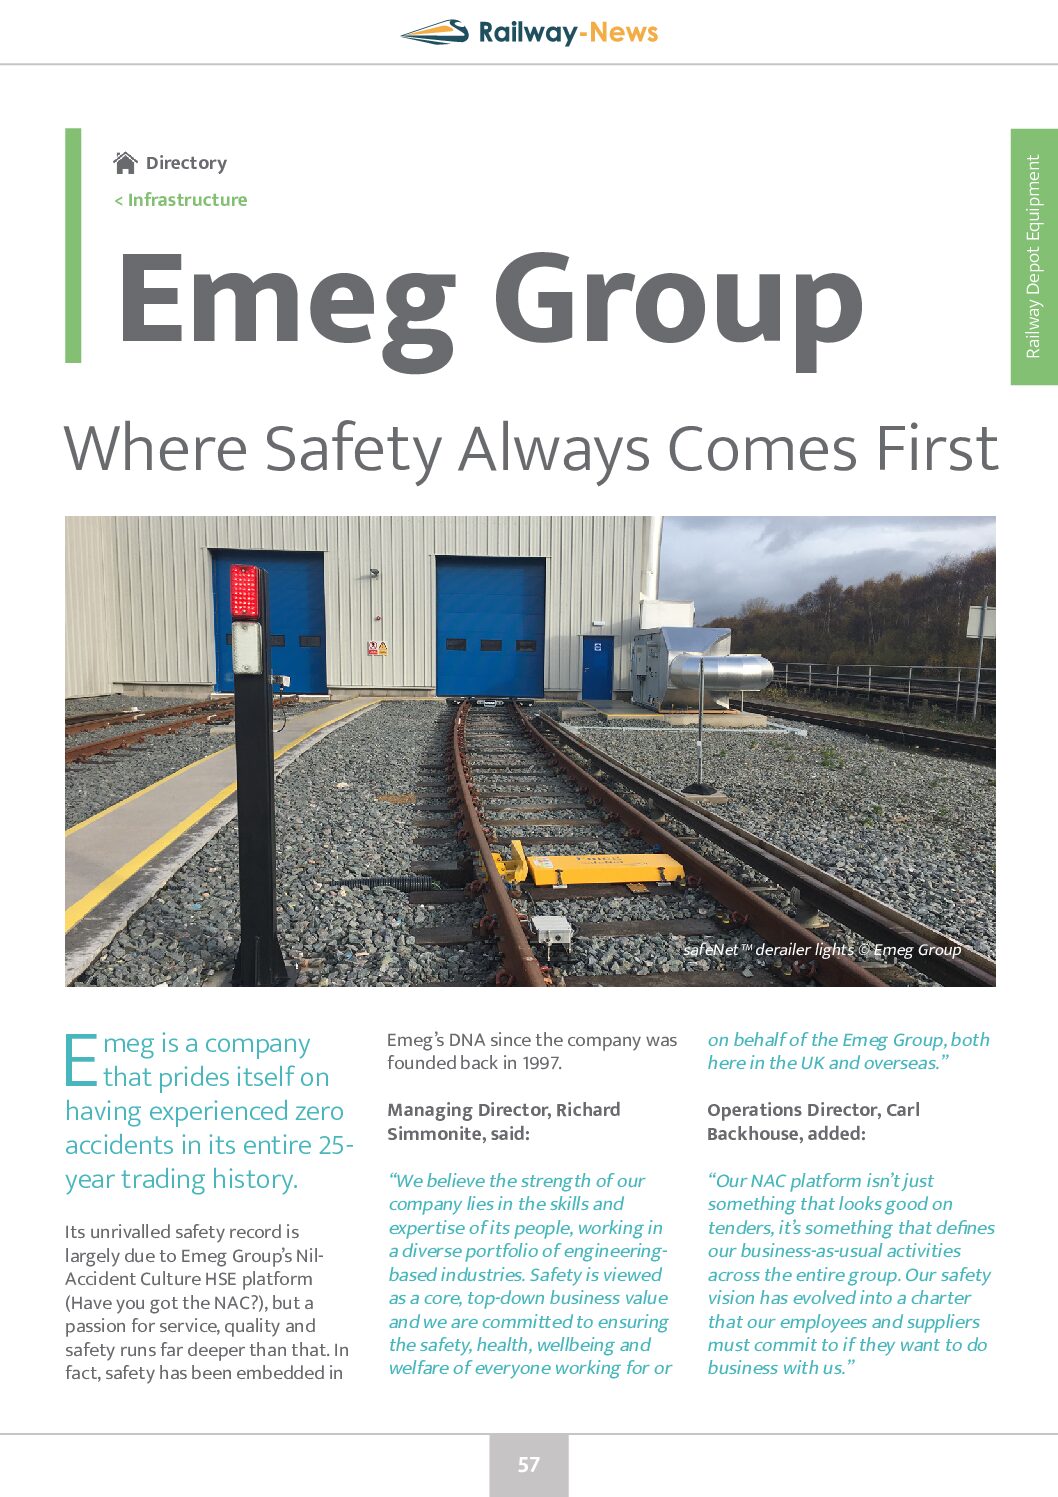 Emeg Group – Where Safety Always Comes First